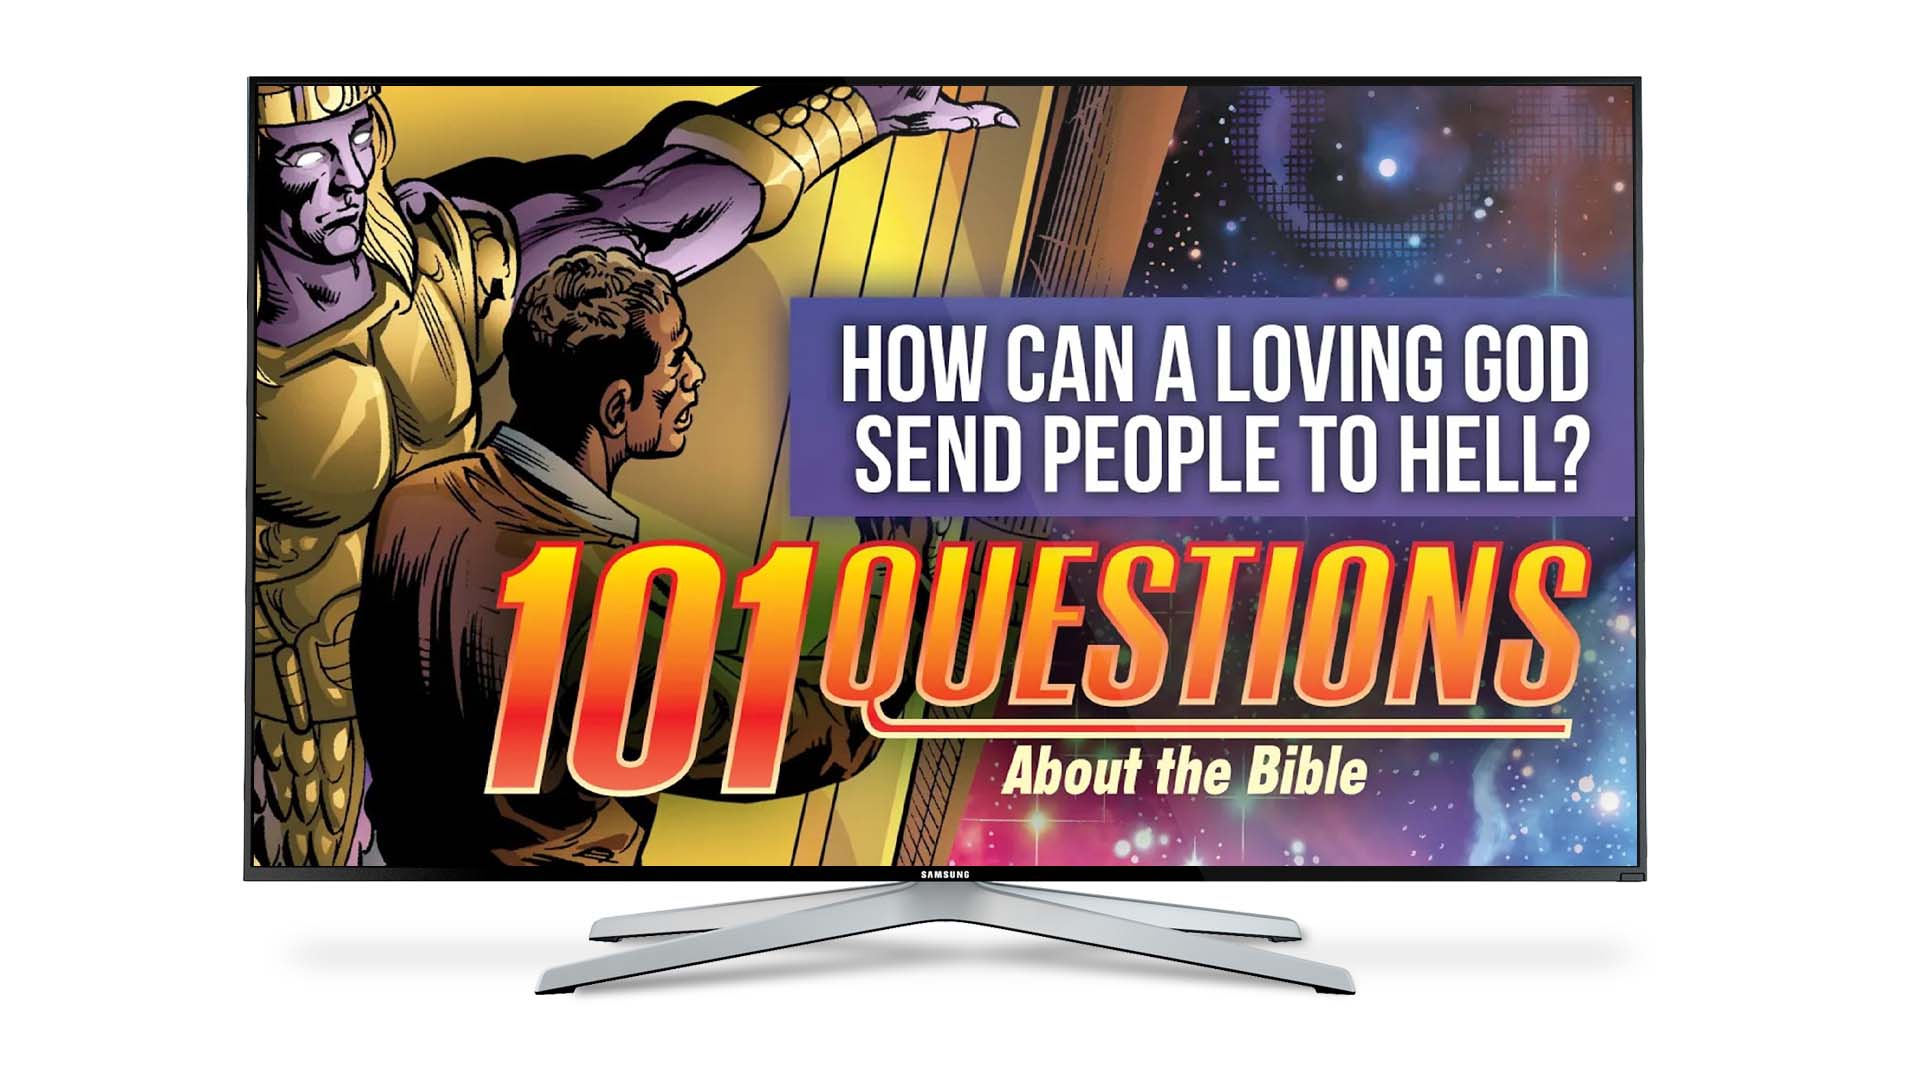 Motion Comic: 101 Questions #12 - How could a loving God send someone to Hell?